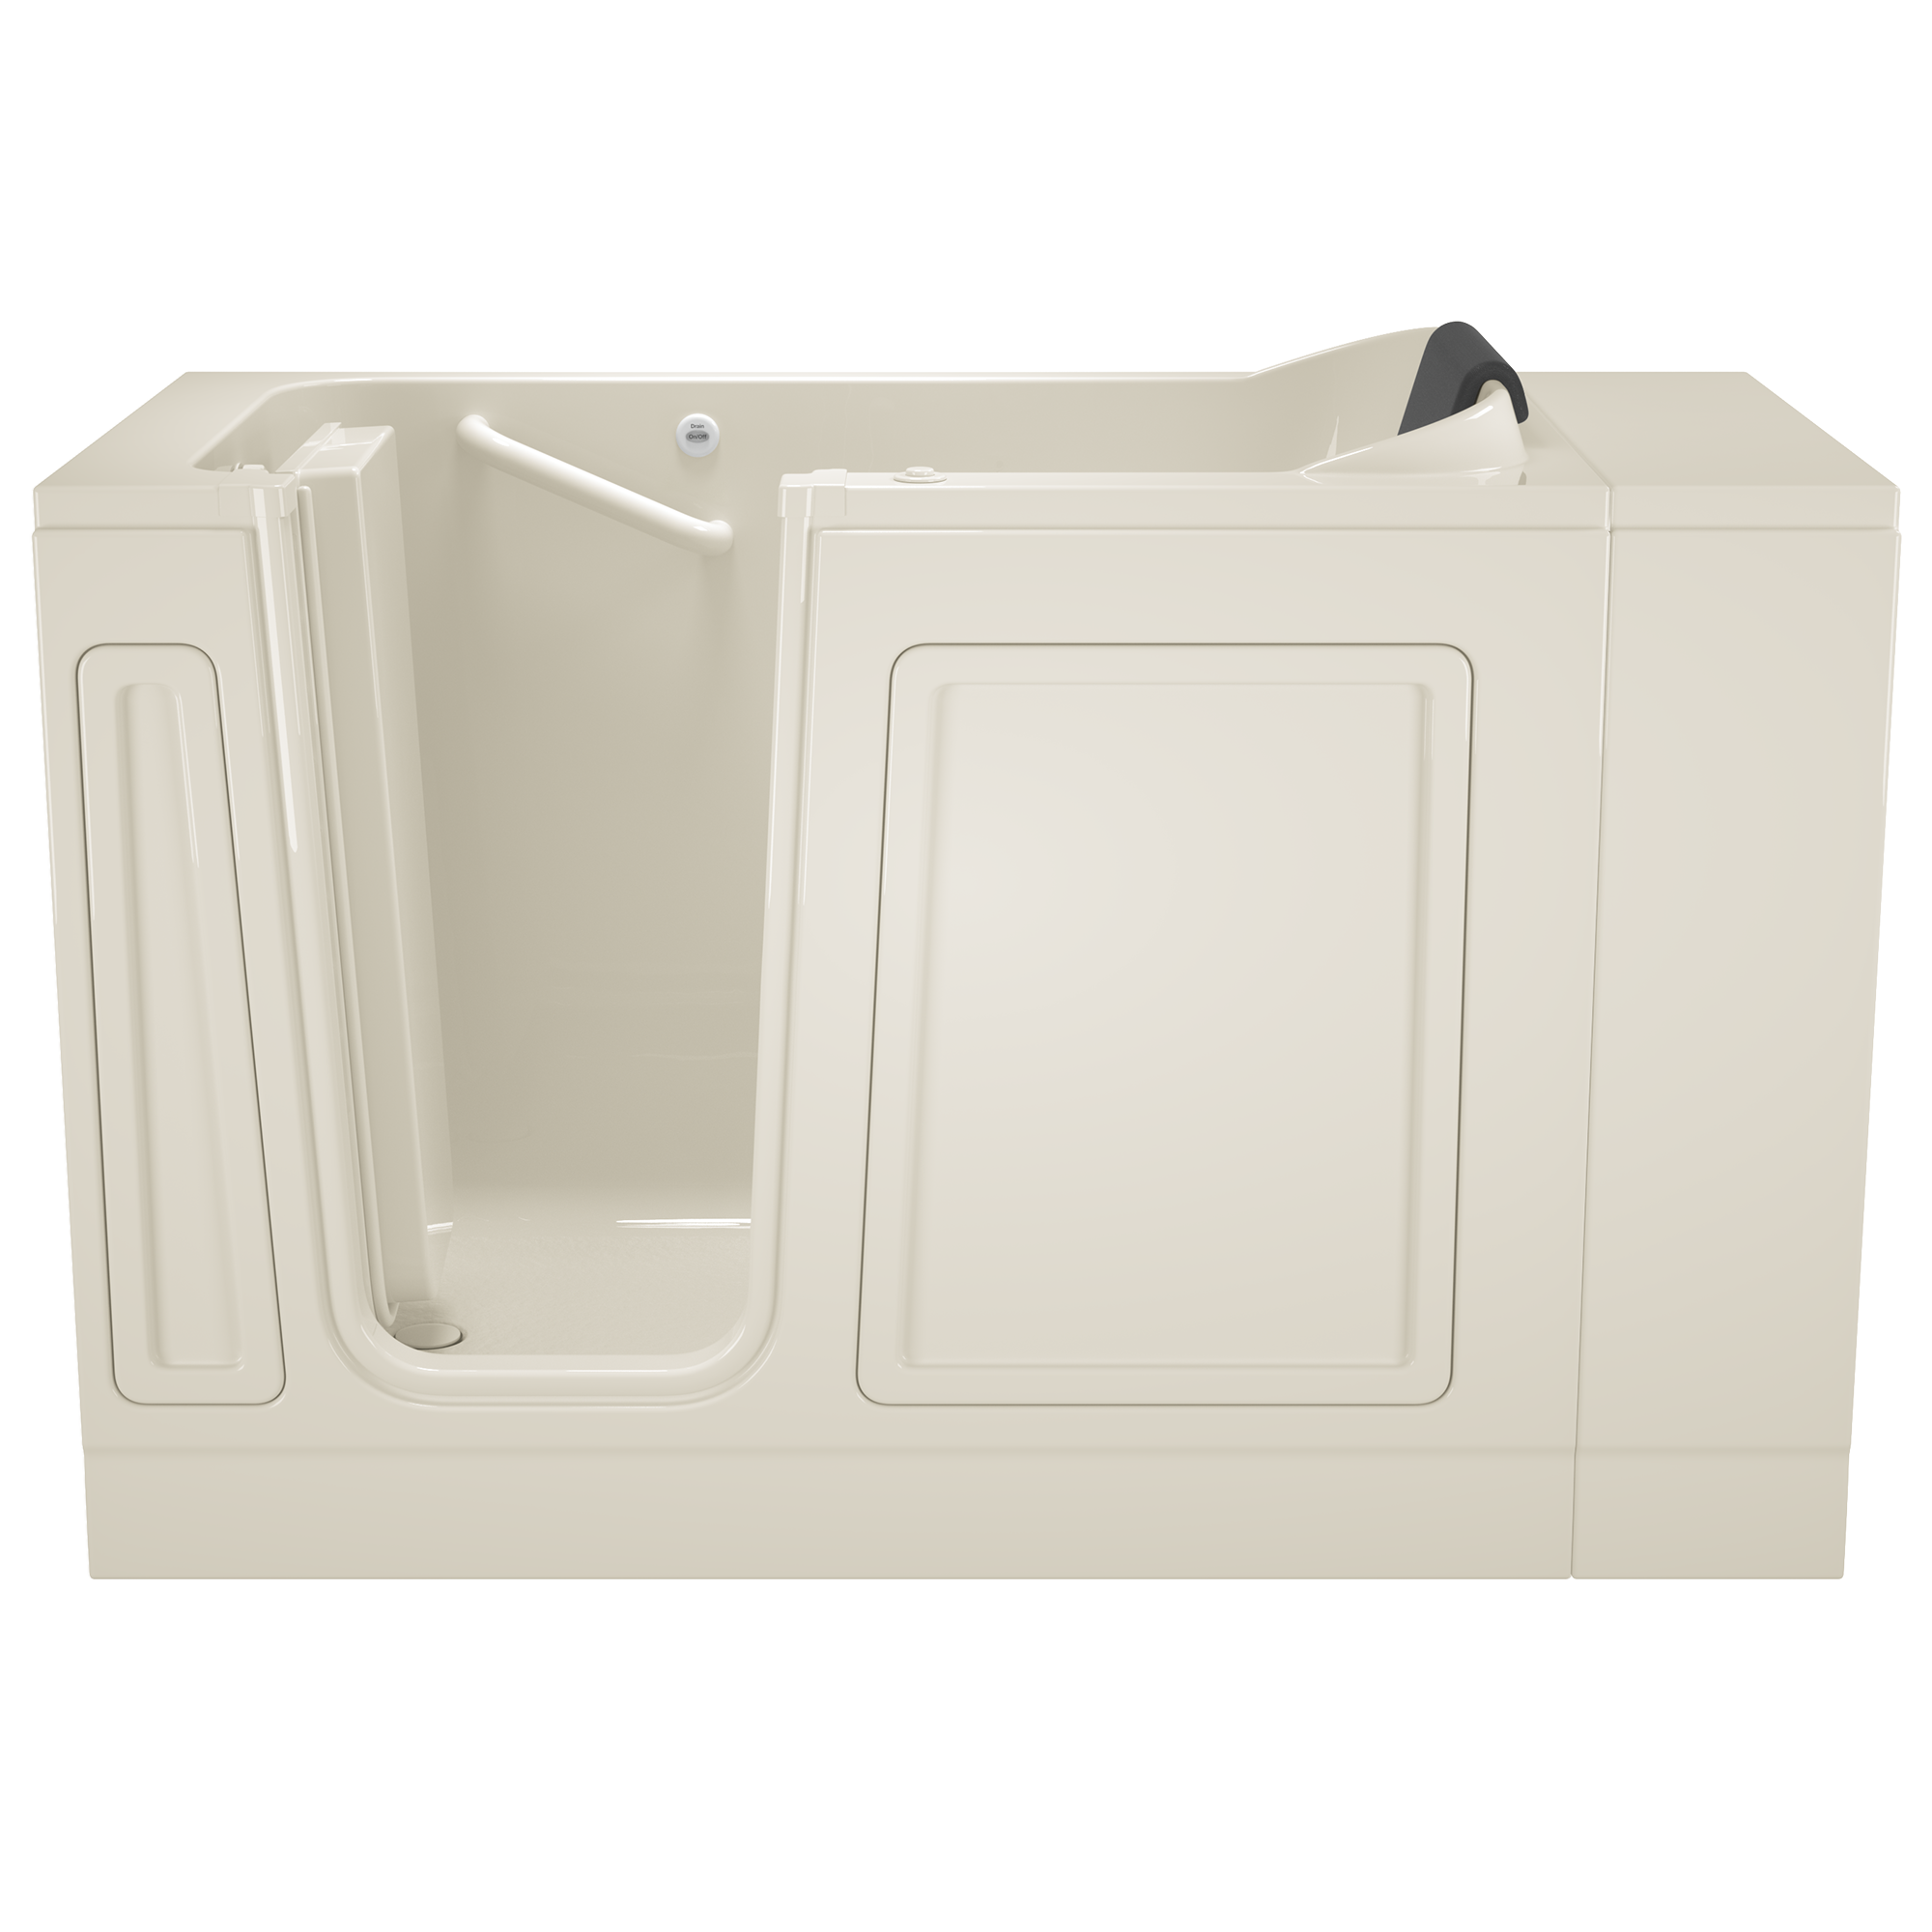 Acrylic Luxury Series 28 x 48-Inch Walk-in Tub With Air Spa System - Left-Hand Drain